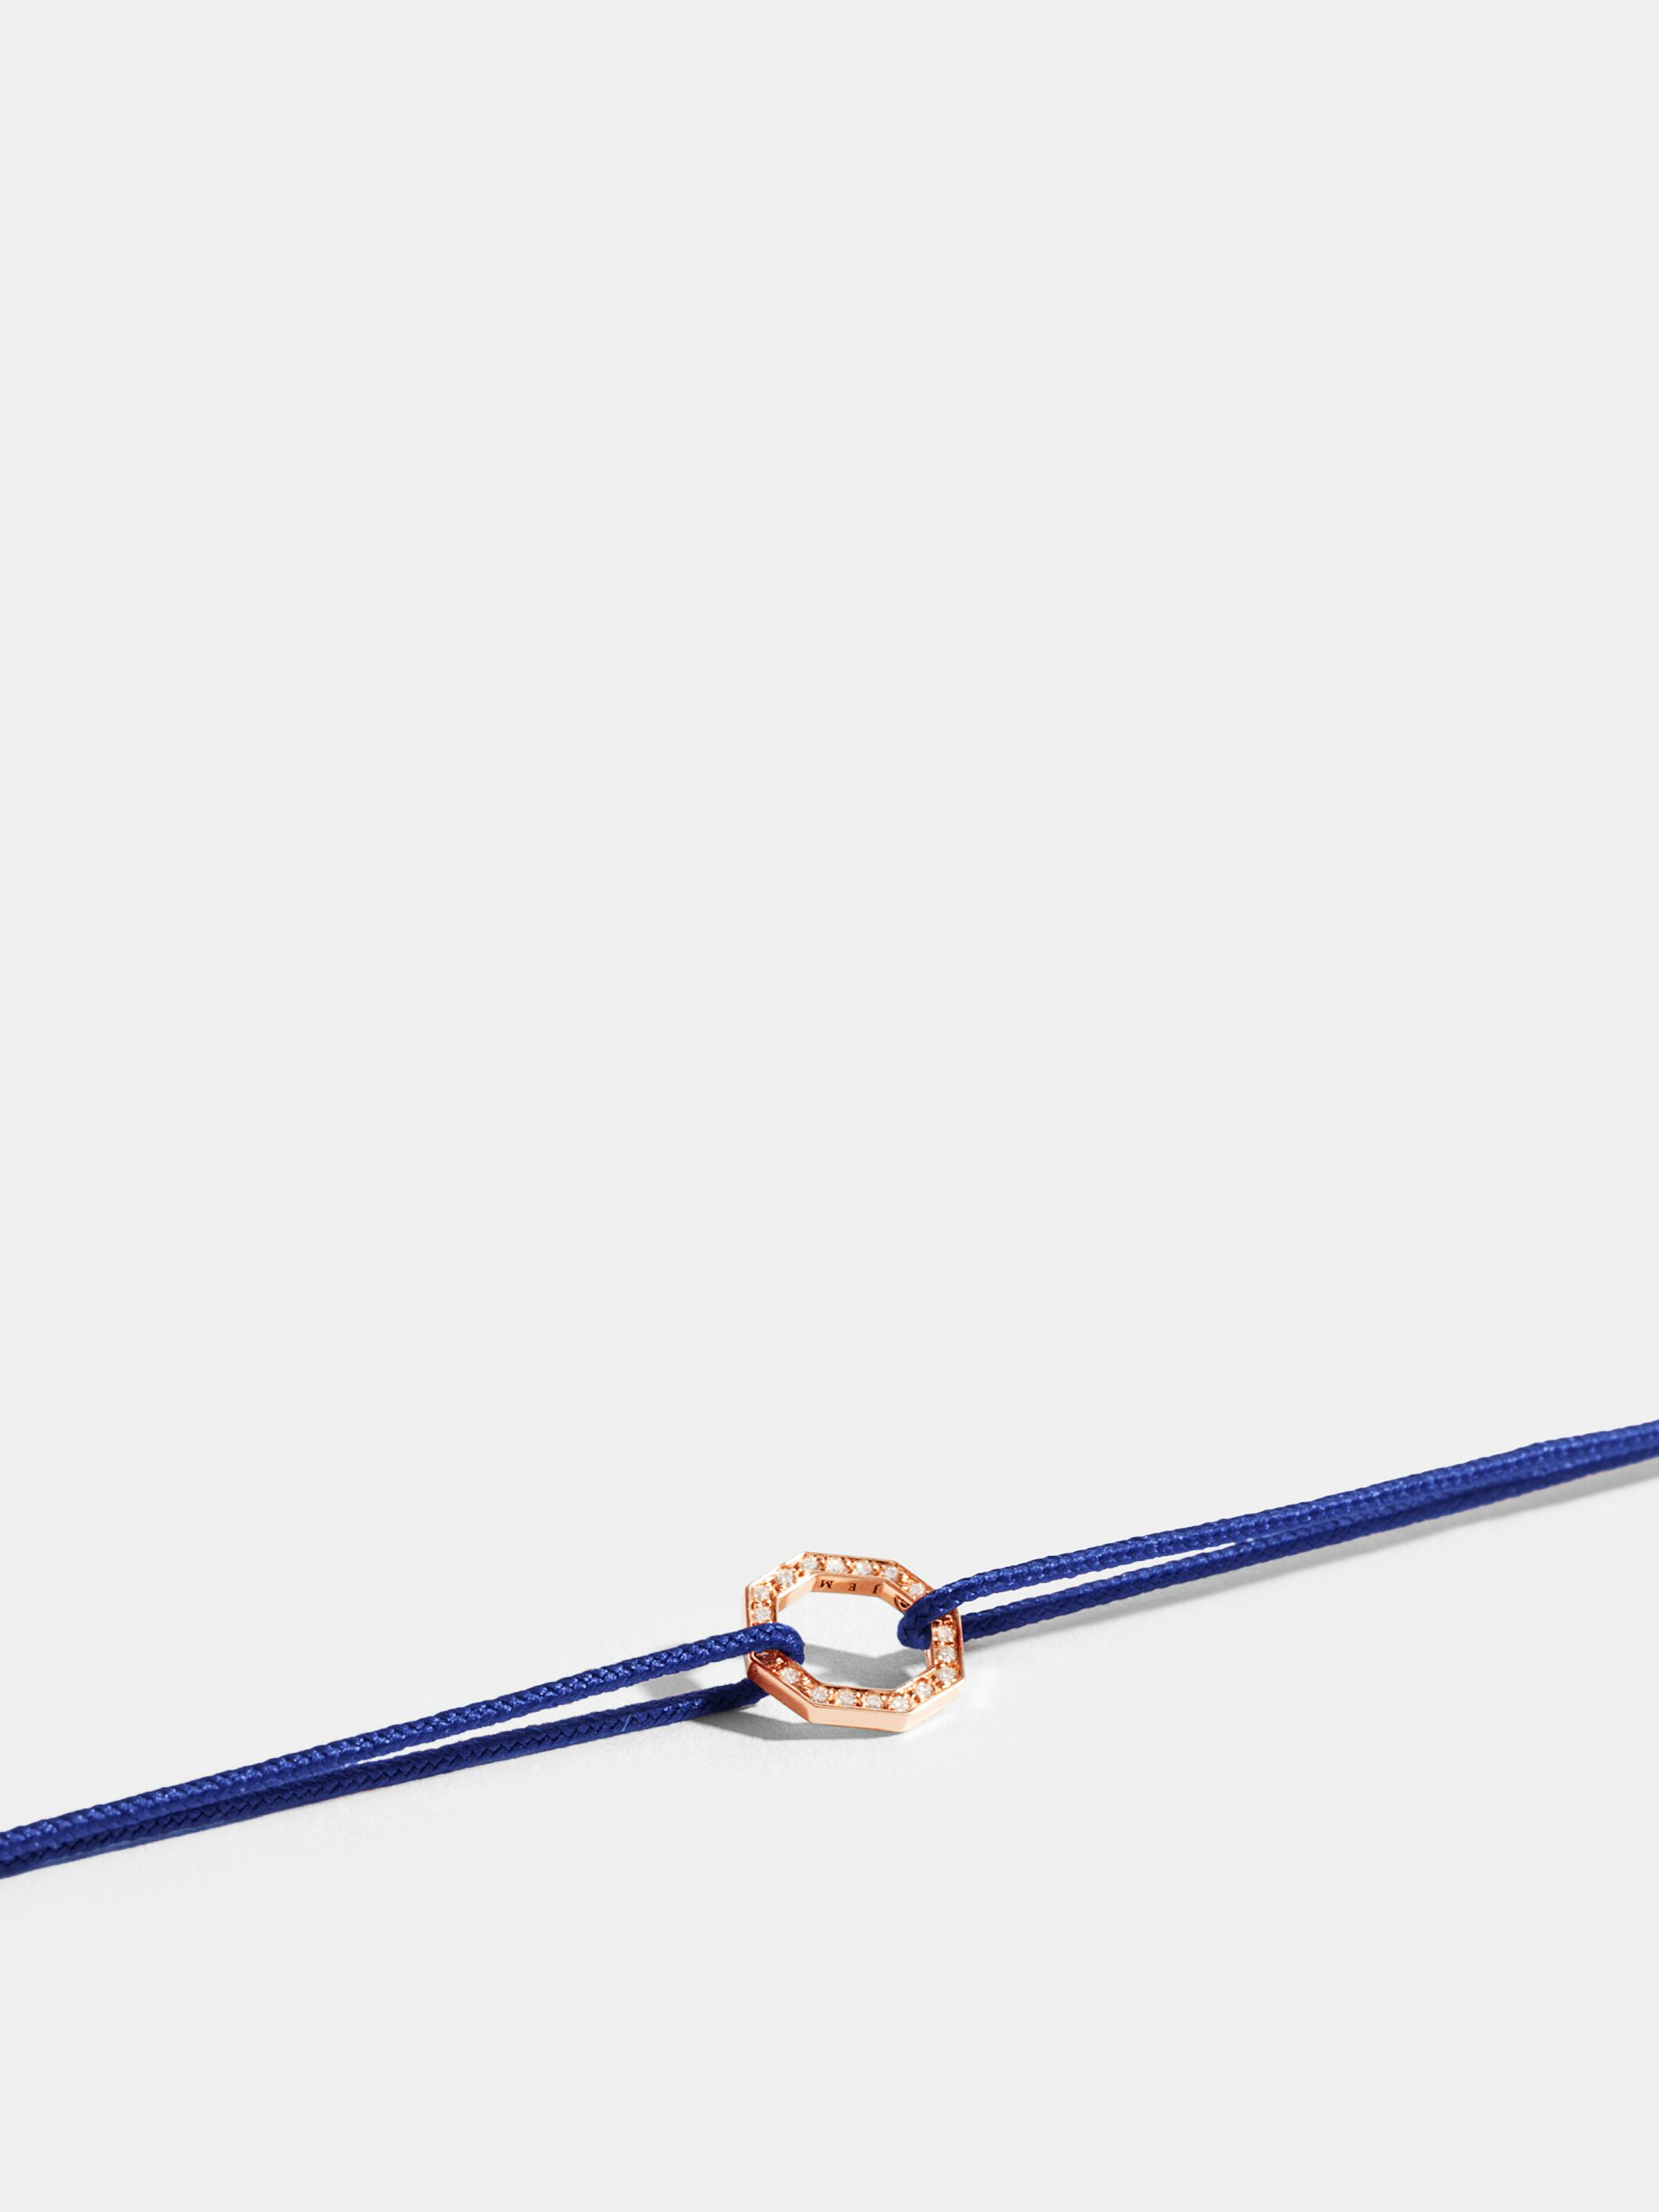 Octogone motif in 18k Fairmined ethical rose gold, paved with lab-grown diamonds, on a cord.